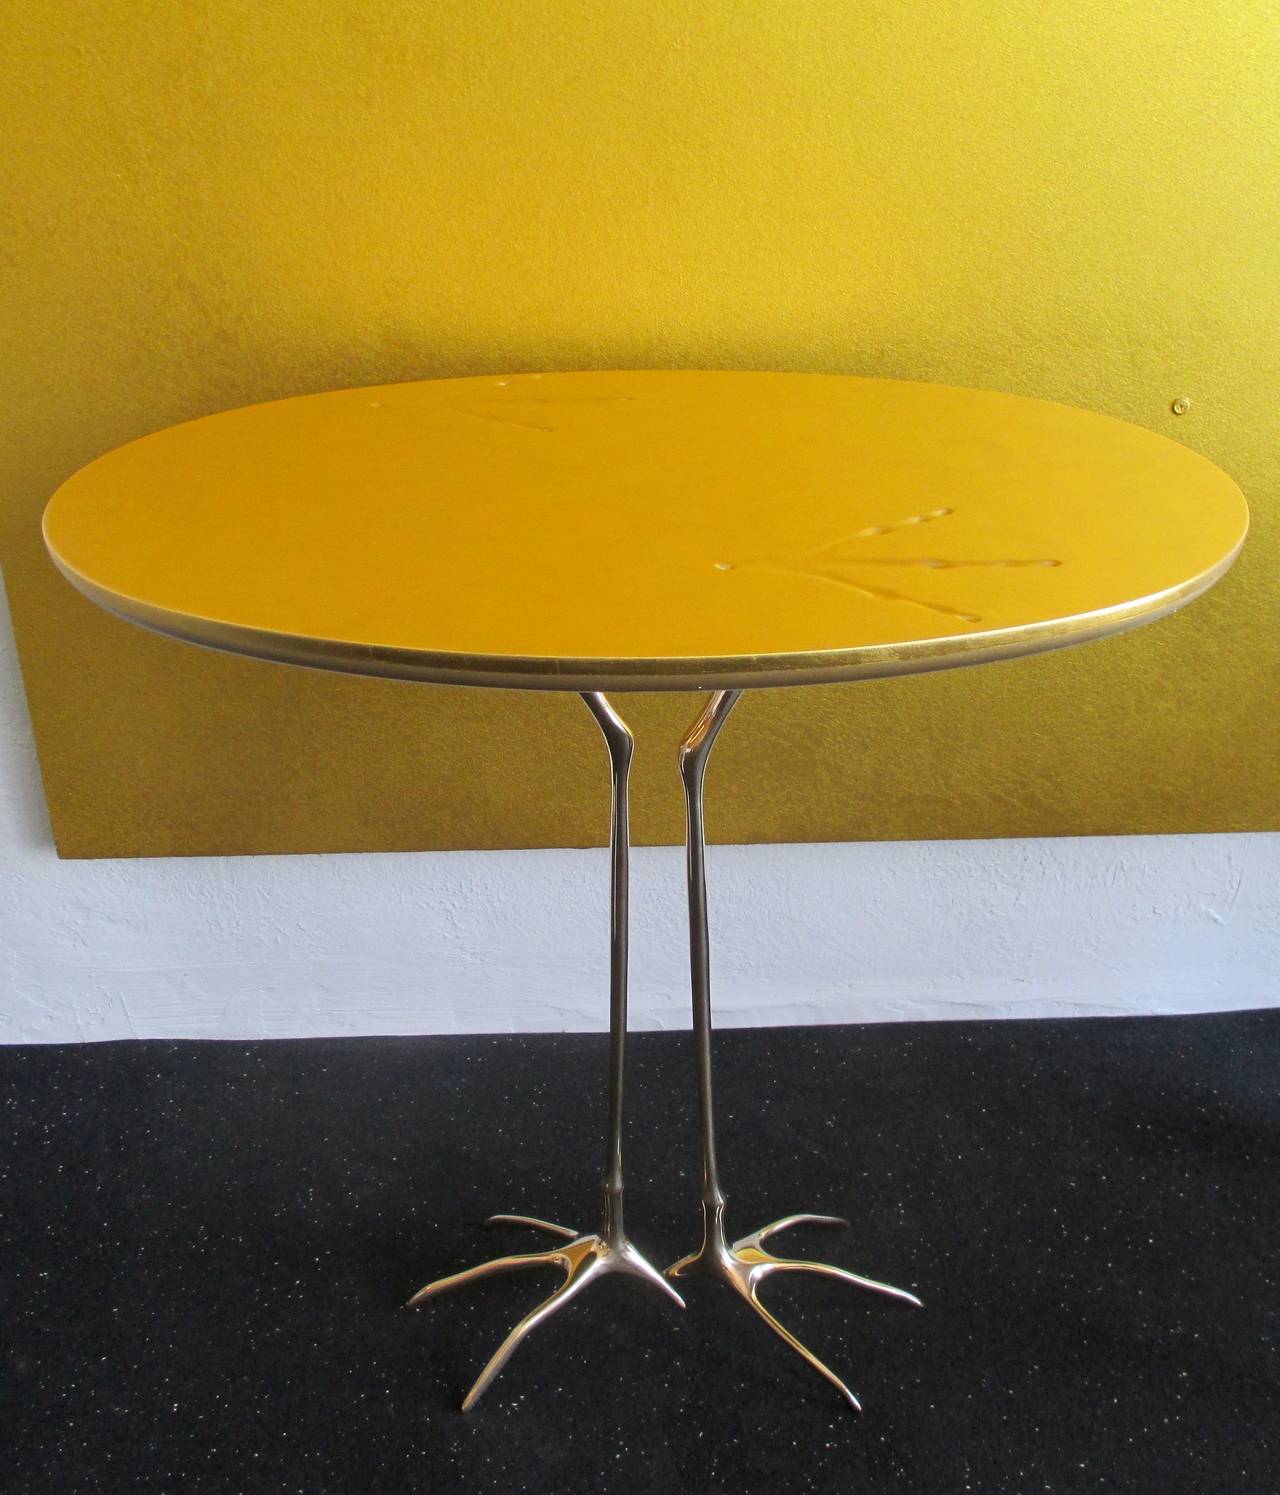 Modern SMALL TABLE GOLD LEAFED W/BRASS LEGS  by Meret Oppenheim